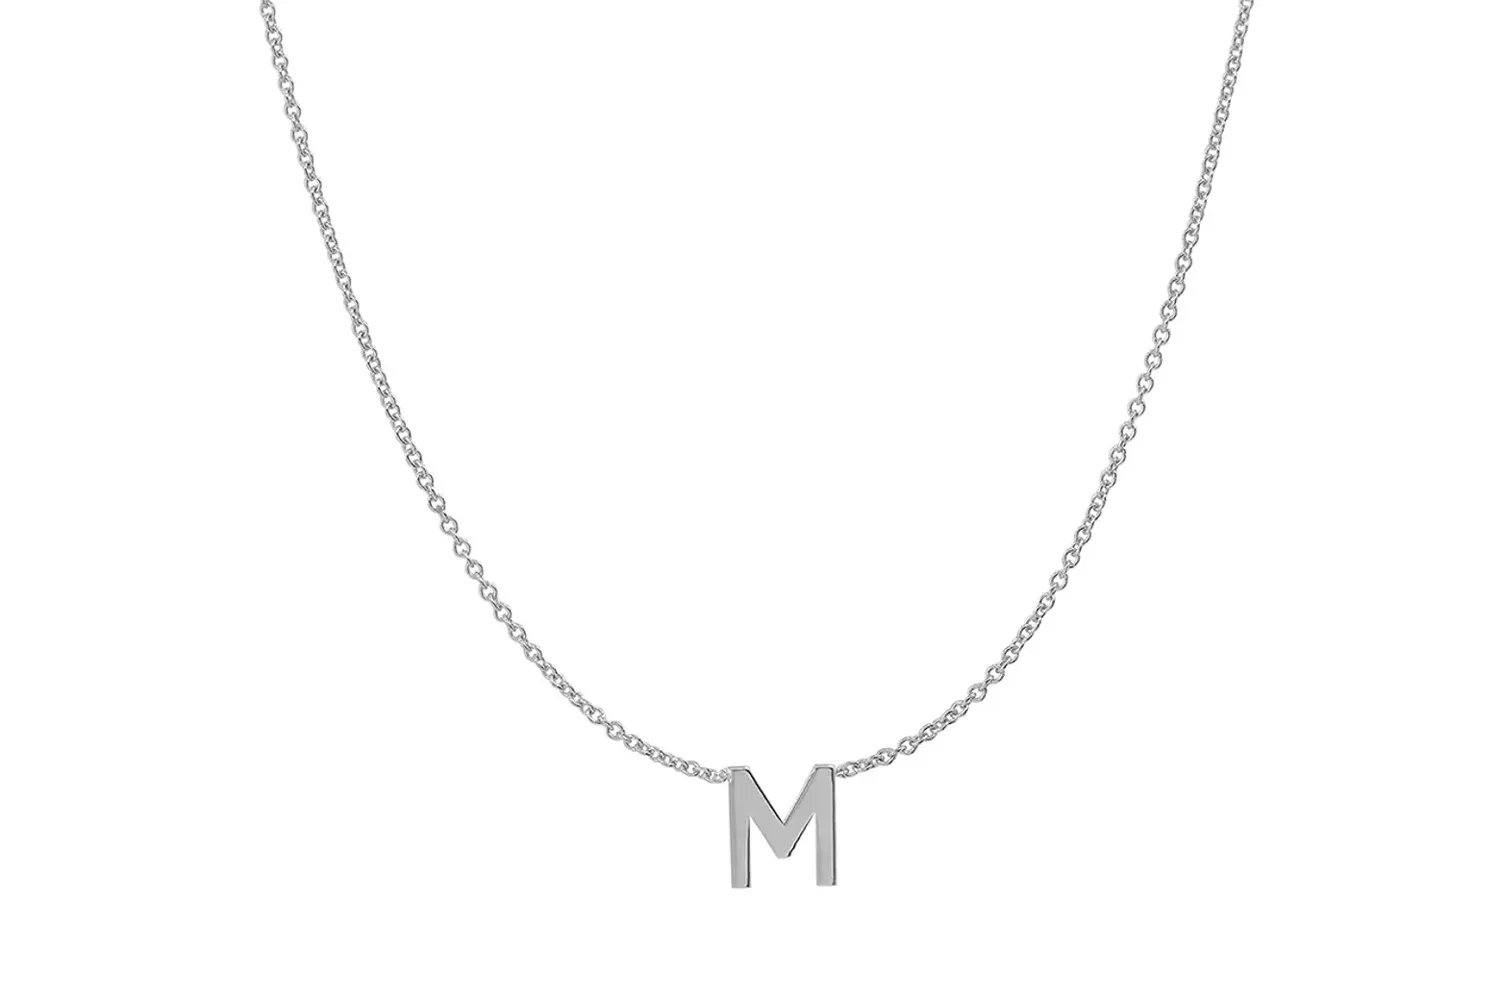 BYCHARI Initial Pendant Necklace